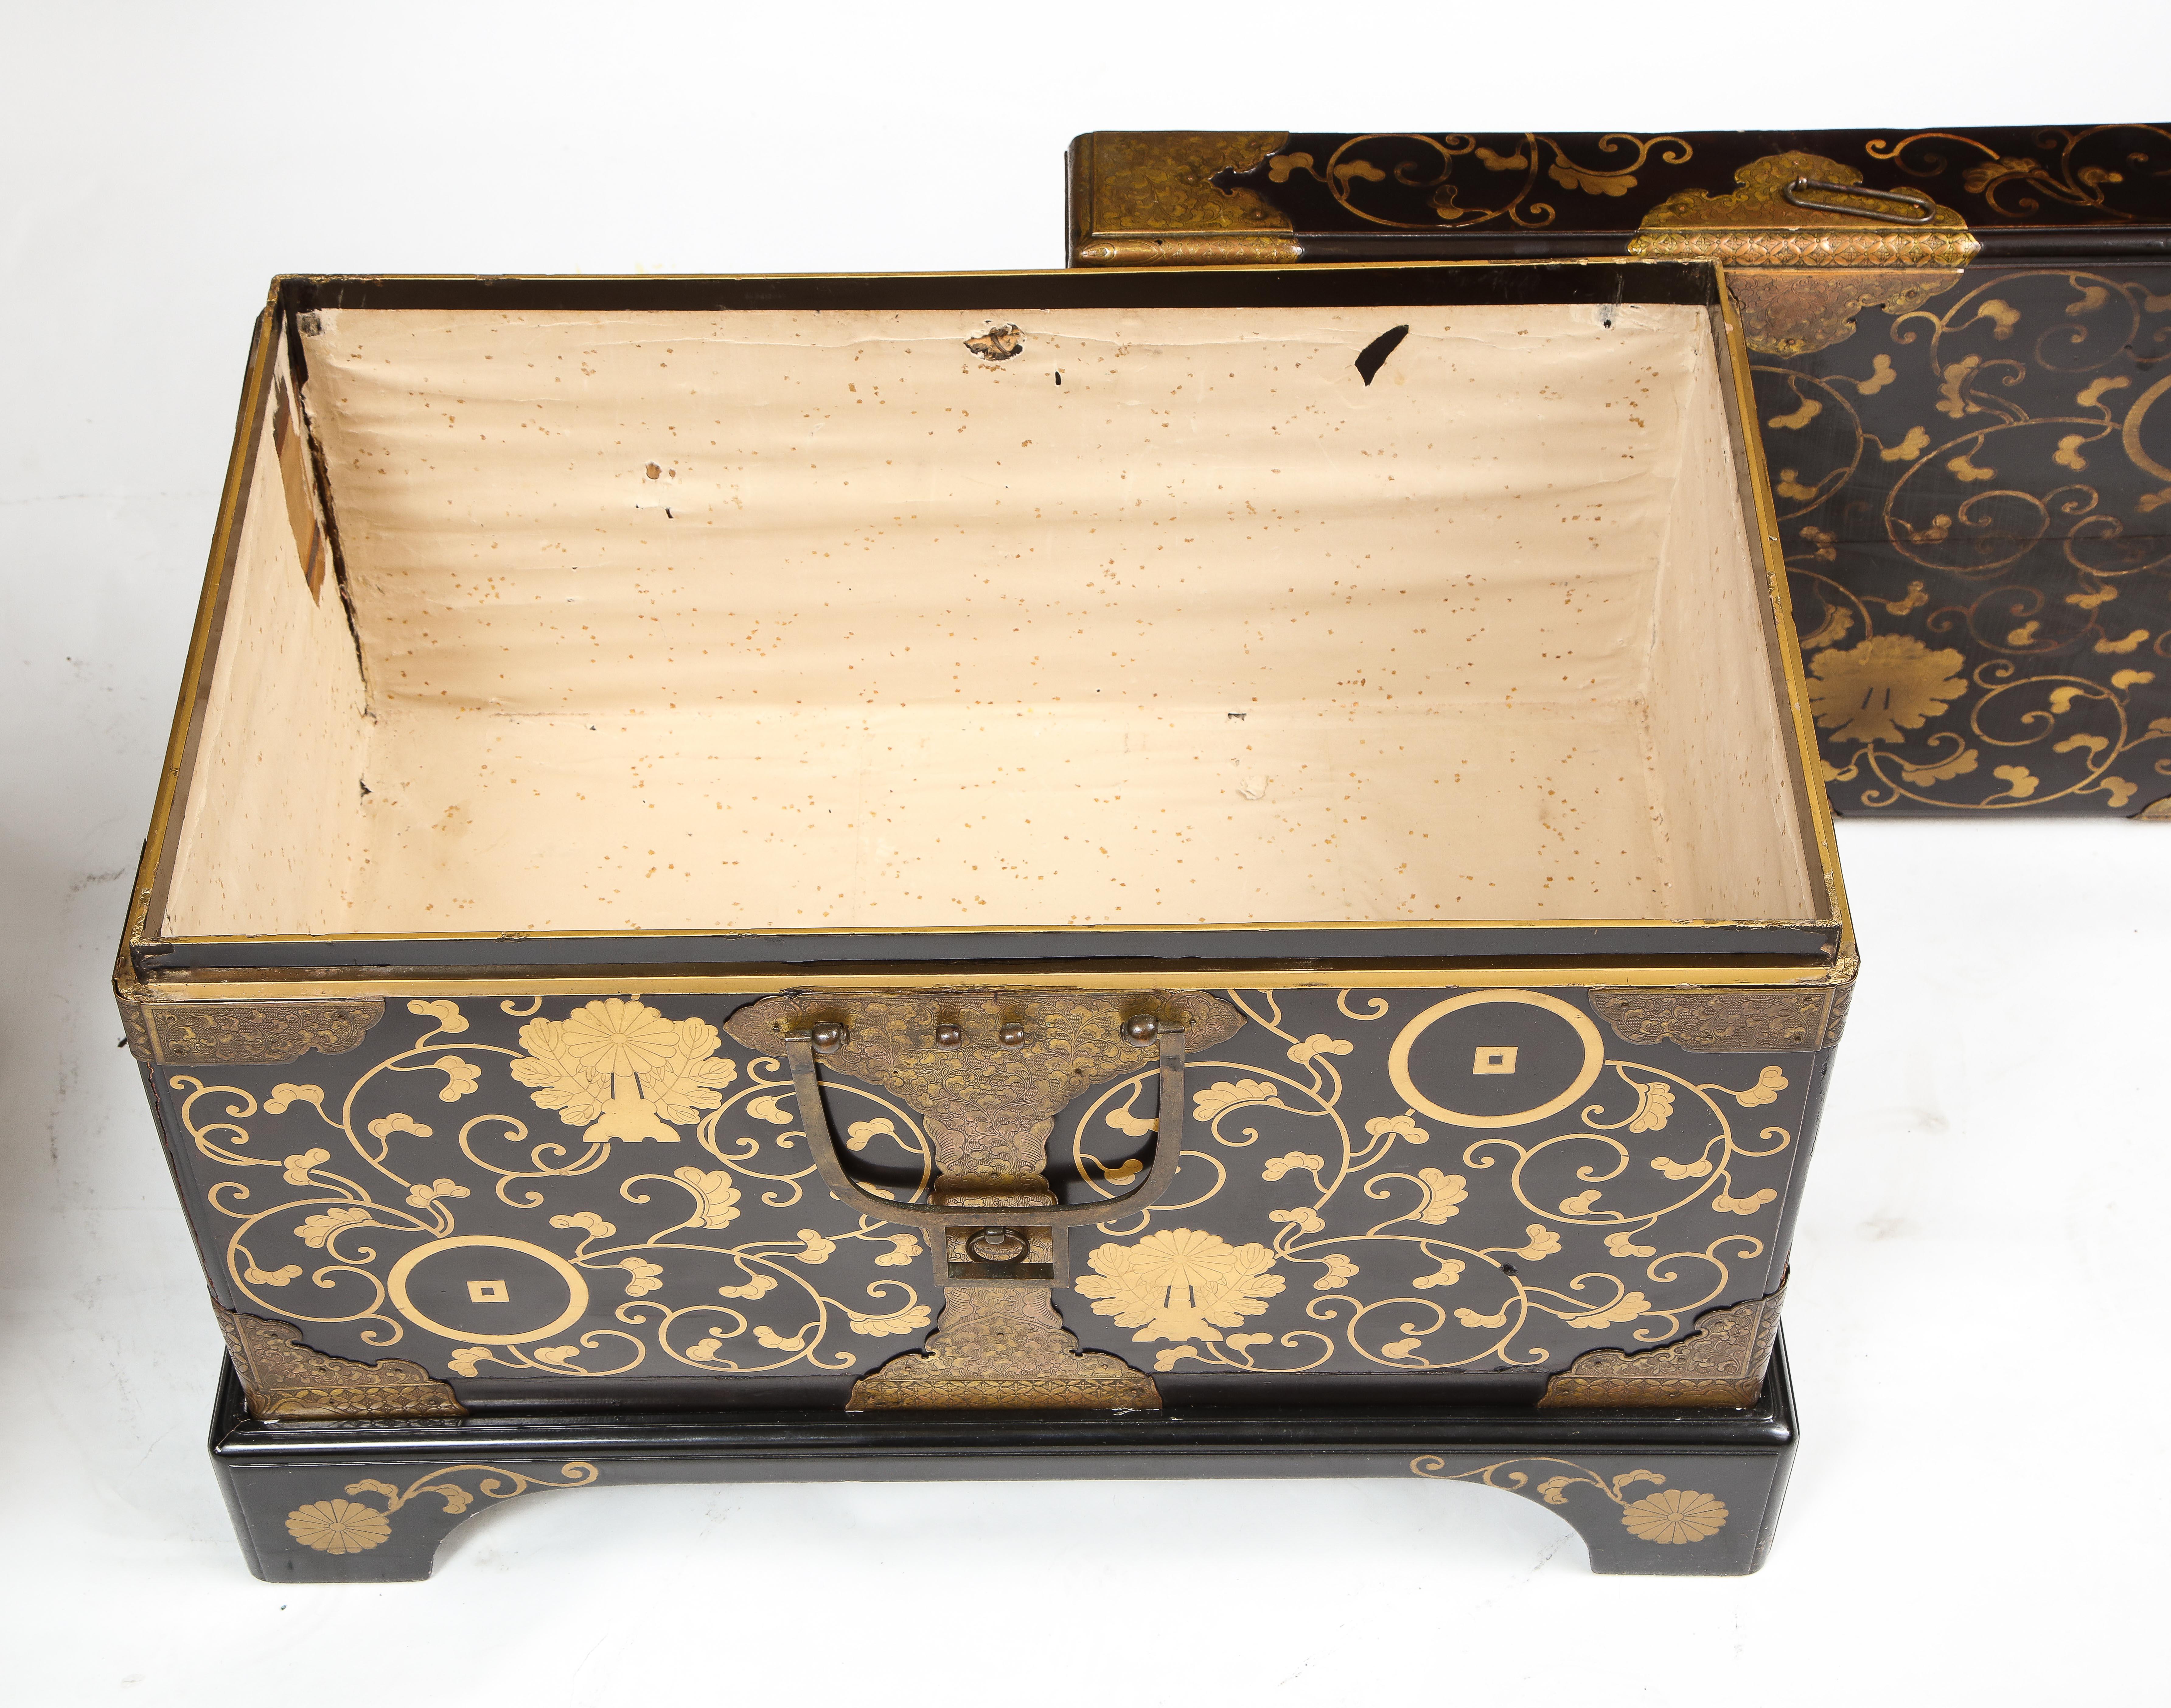  Pair of 19th Century Japanese Meiji Period Dore Bronze Mounted Lacquered Chests For Sale 12